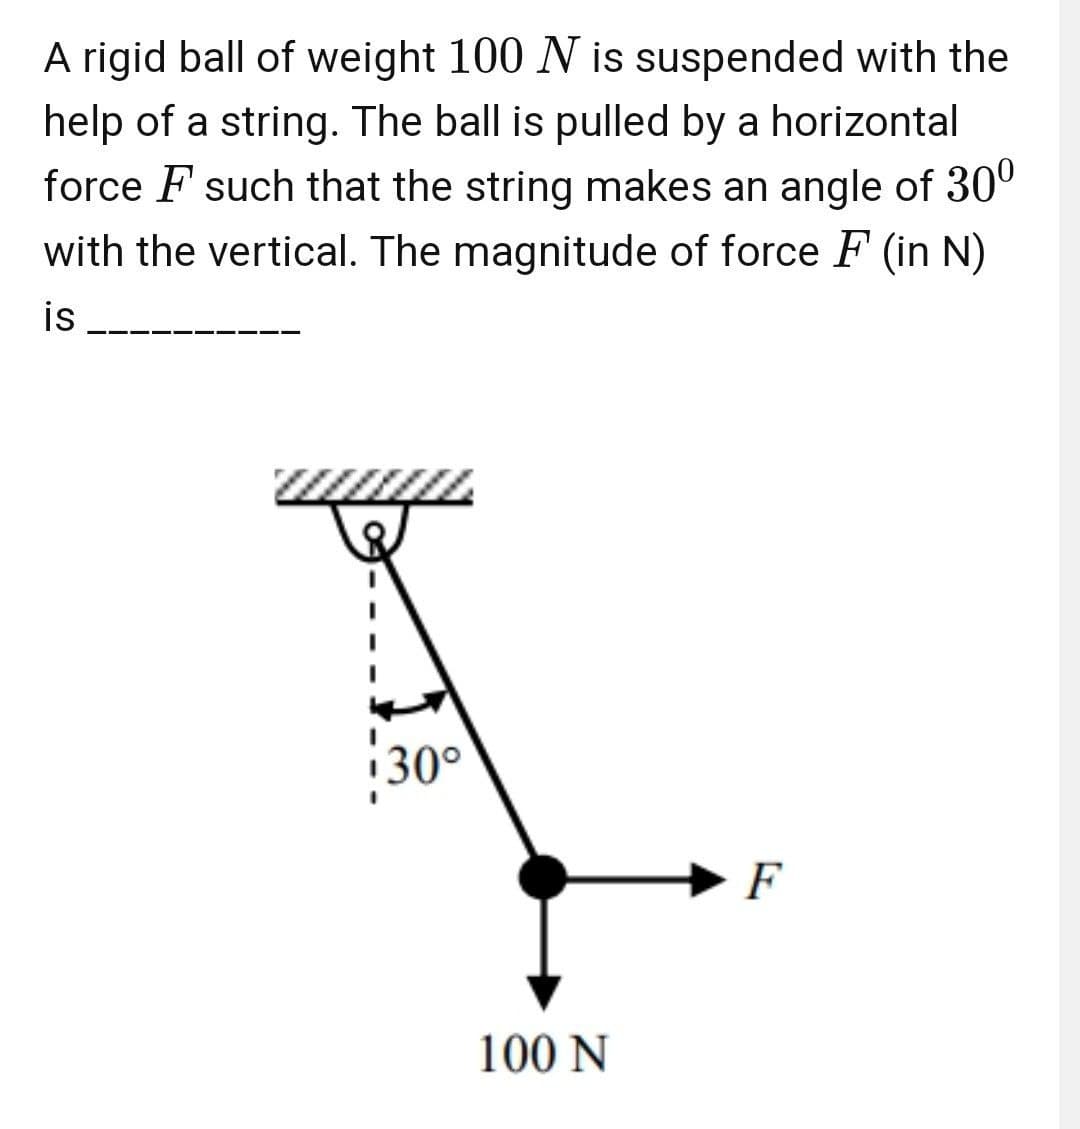 A rigid ball of weight 100 N is suspended with the
help of a string. The ball is pulled by a horizontal
force F such that the string makes an angle of 30°
with the vertical. The magnitude of force F (in N)
is
i30°
F
100 N